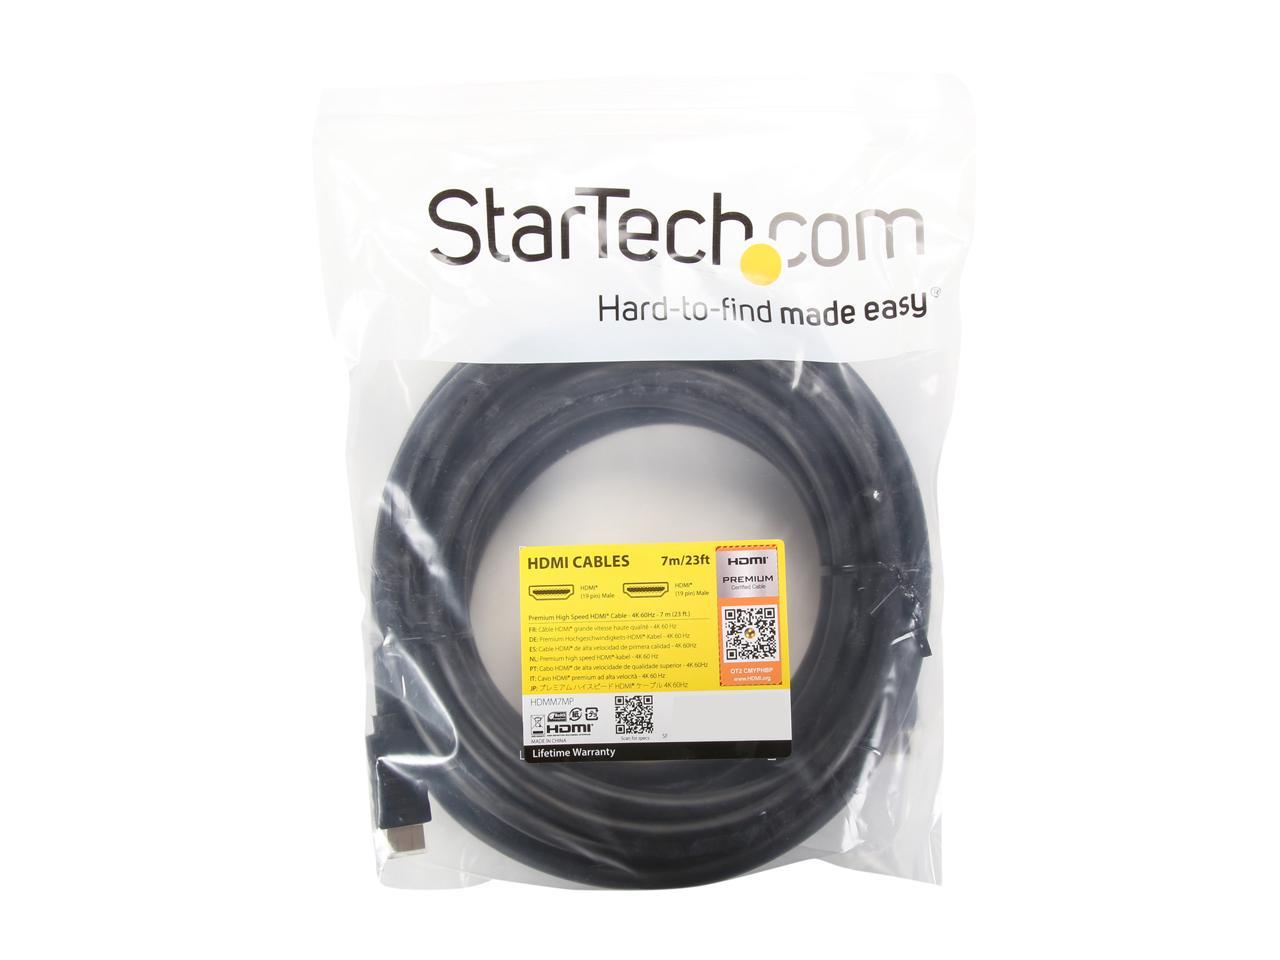 StarTech.com HDMM7MP 4K HDMI Cable - with Ethernet - 7m / 23 ft HDMI Cable - 4K 60Hz - High Speed HDMI Cable 2.0 - HDMI Cord - Long HDMI Cable